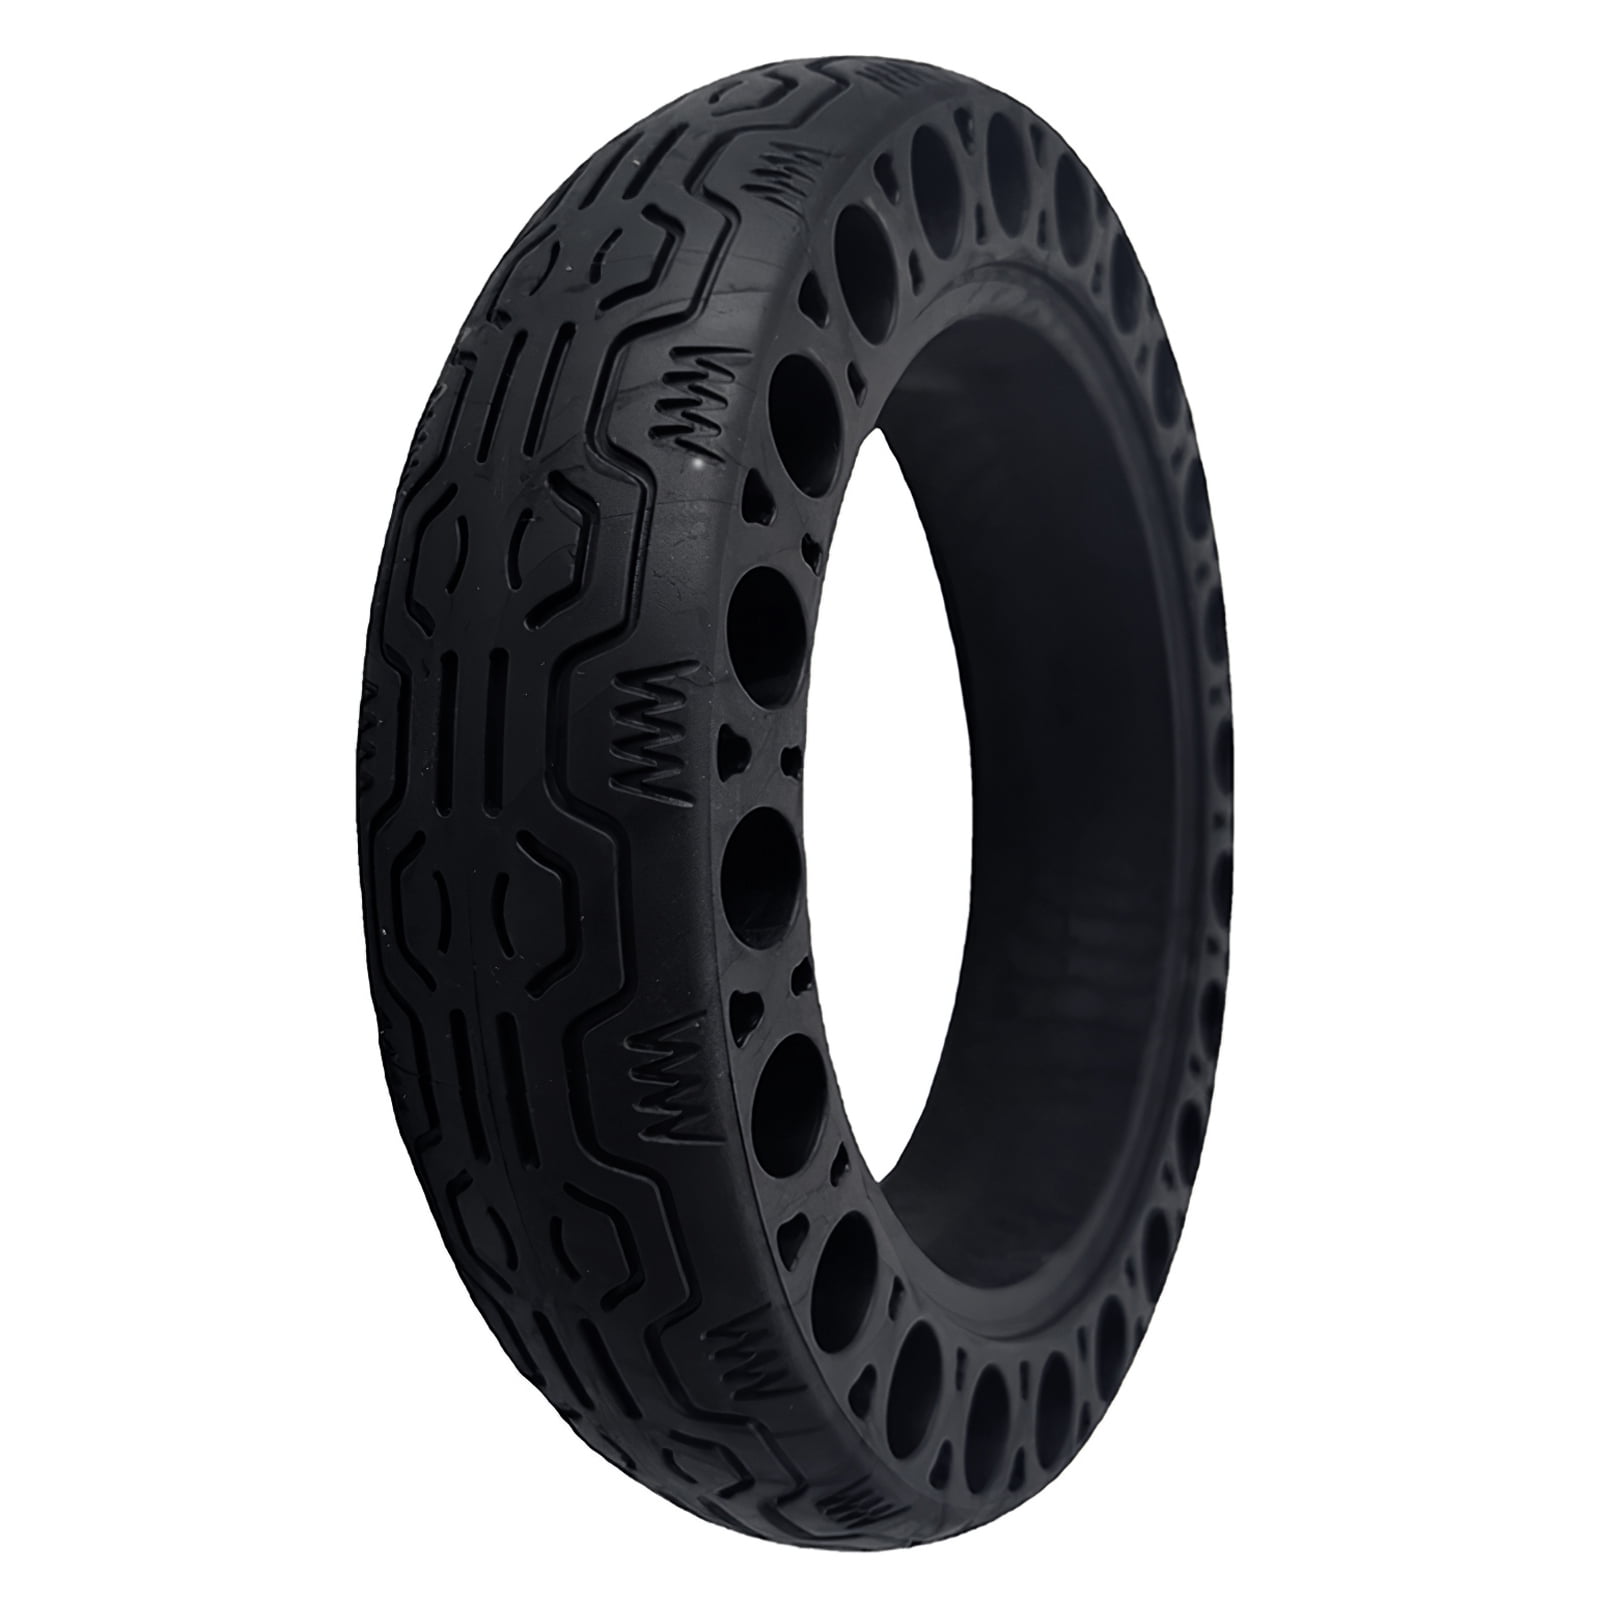 Solid Tire For Ninebot Max G30 Electric Scooter 60/70-6.5 Rubber Tires Wheel 